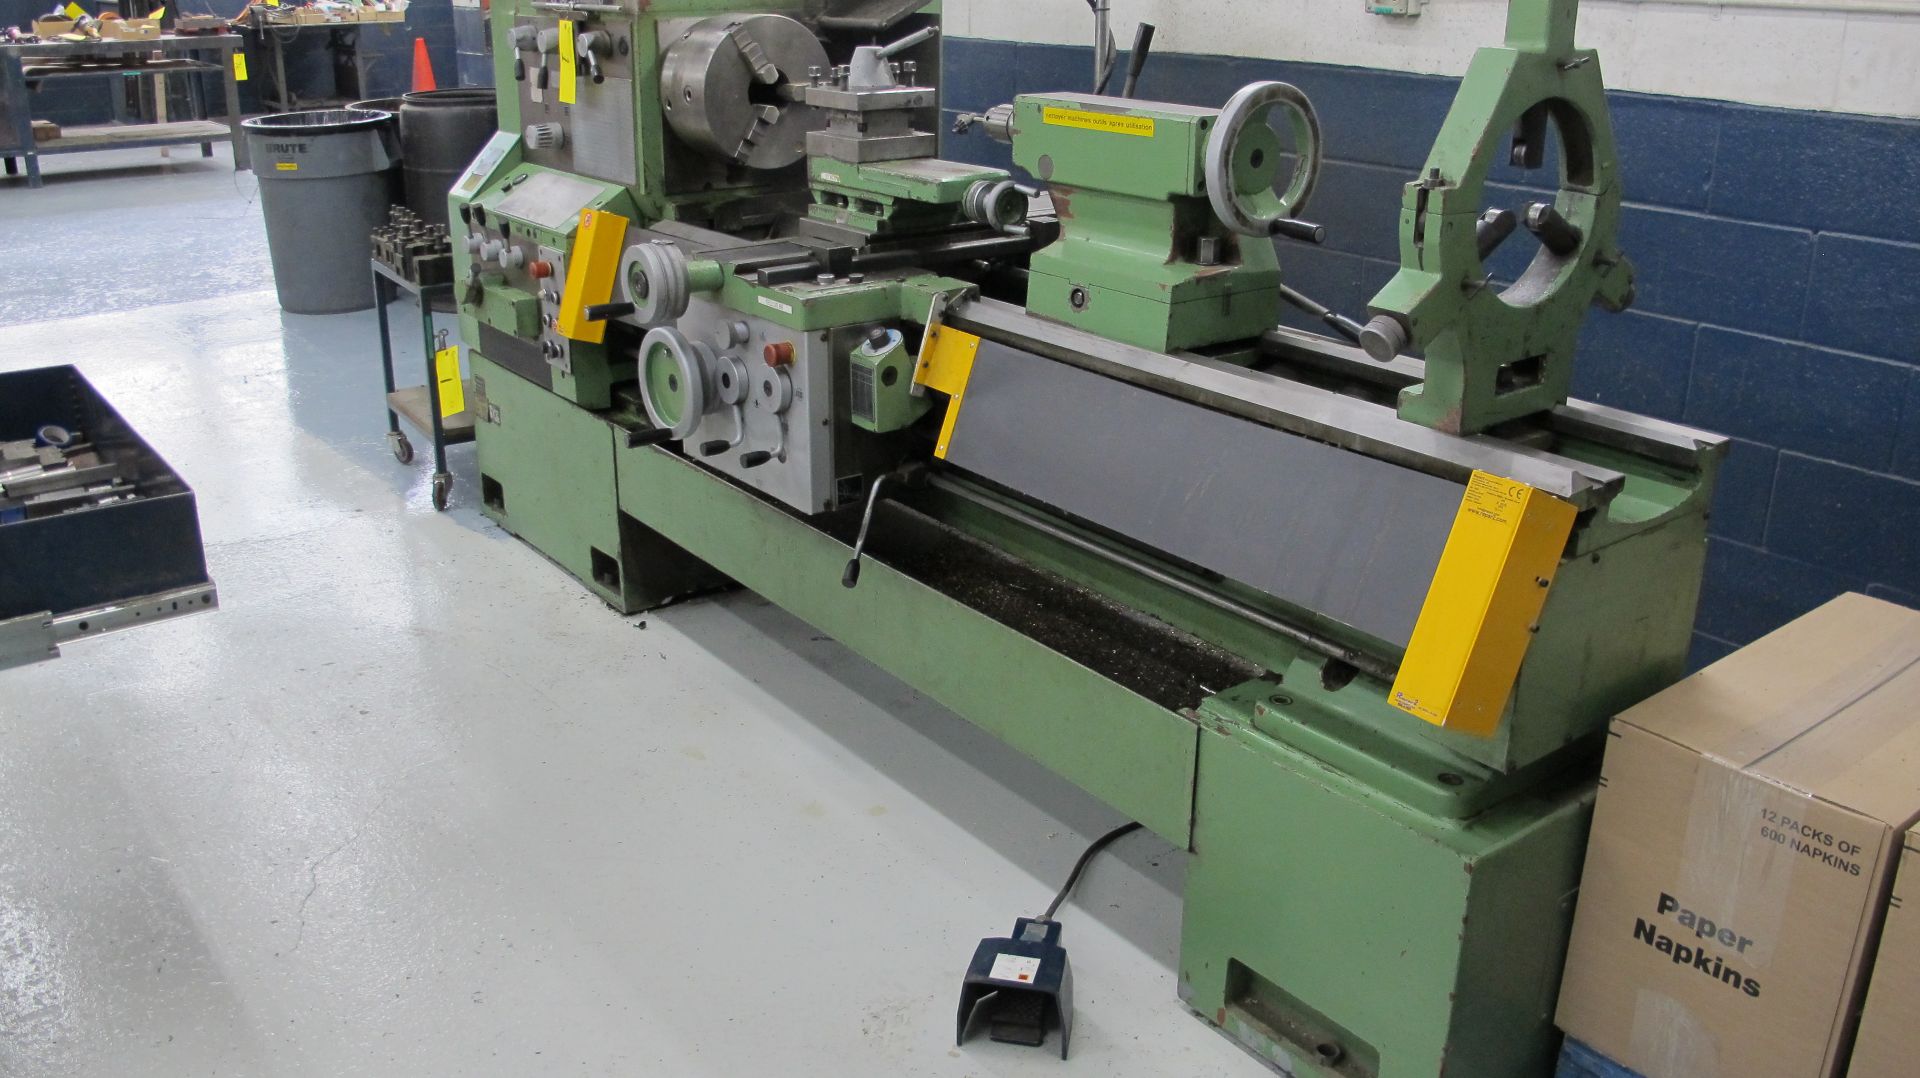 TARNOW TUI50M LATHE, S/N 3562, 20 TO 1,600 RPM, 24" SWING, 80" BED, 3 AND 4 JAW CHUCKS, QUICK CHANGE - Image 8 of 14